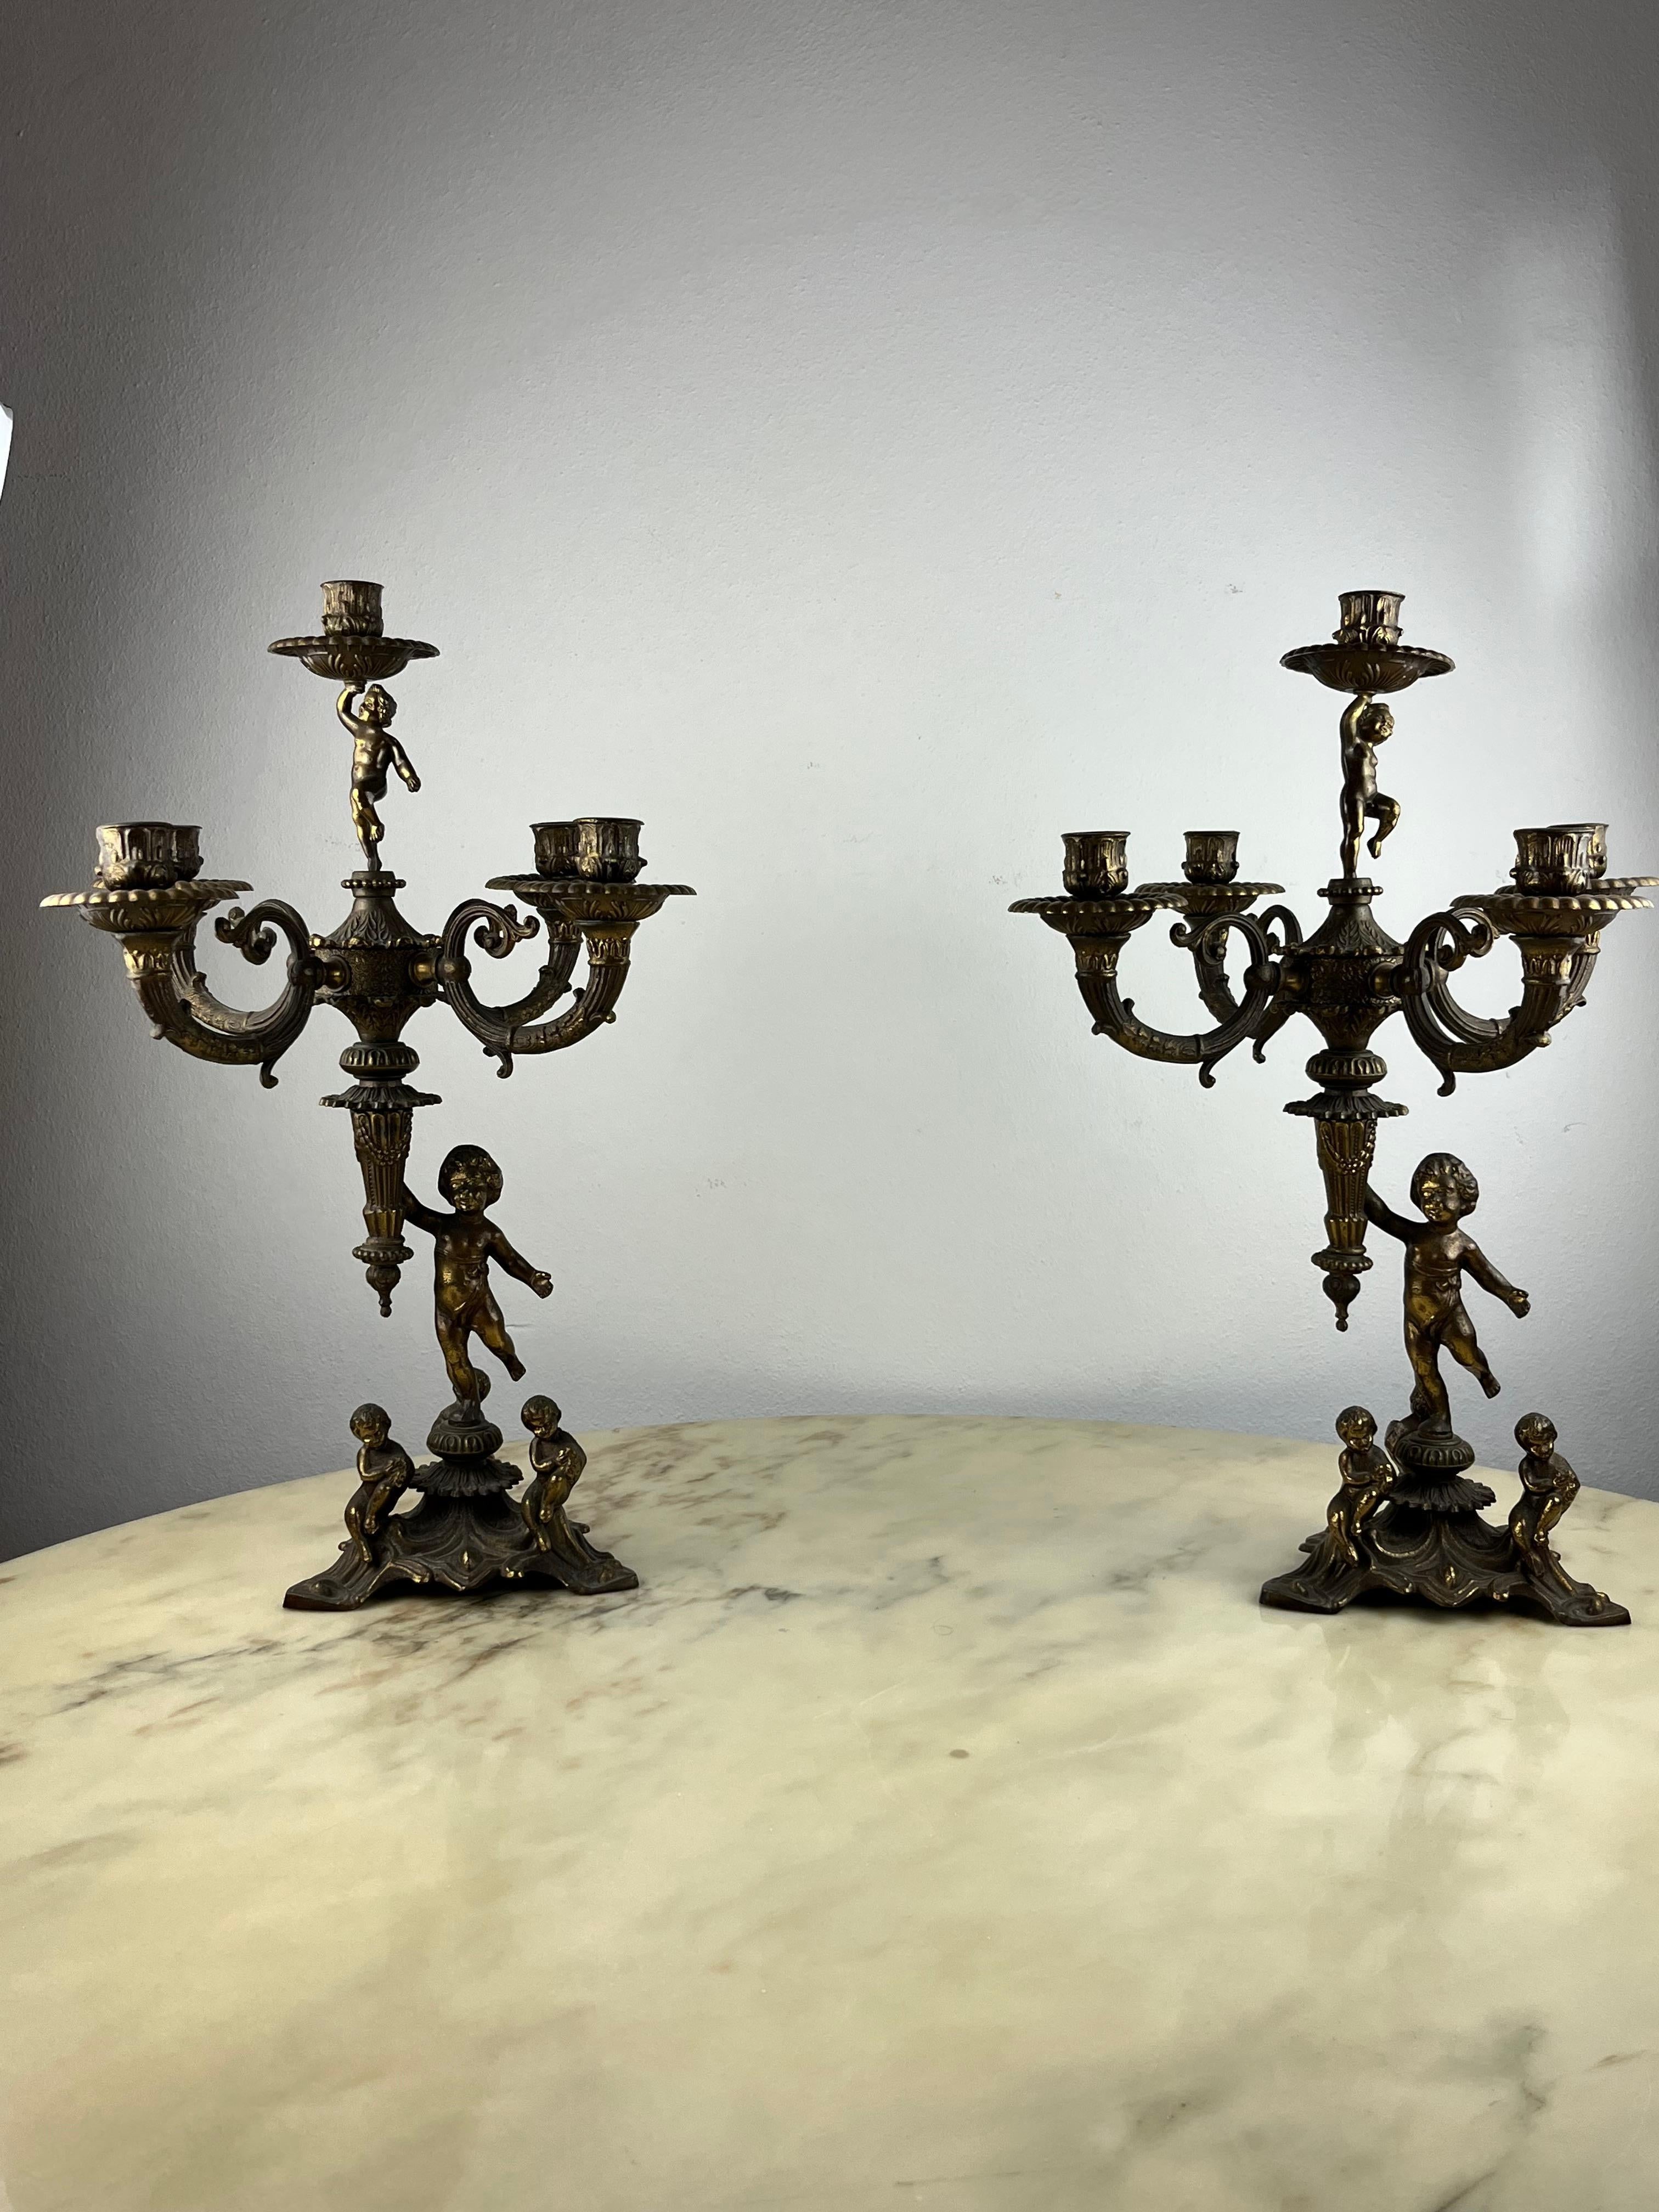 Pair of 5-flame bronze candelabra, Italy, 1960s.
Found in a noble apartment in the Sicilian hinterland. Overall in excellent condition considering its age. Very small signs of wear and tear.